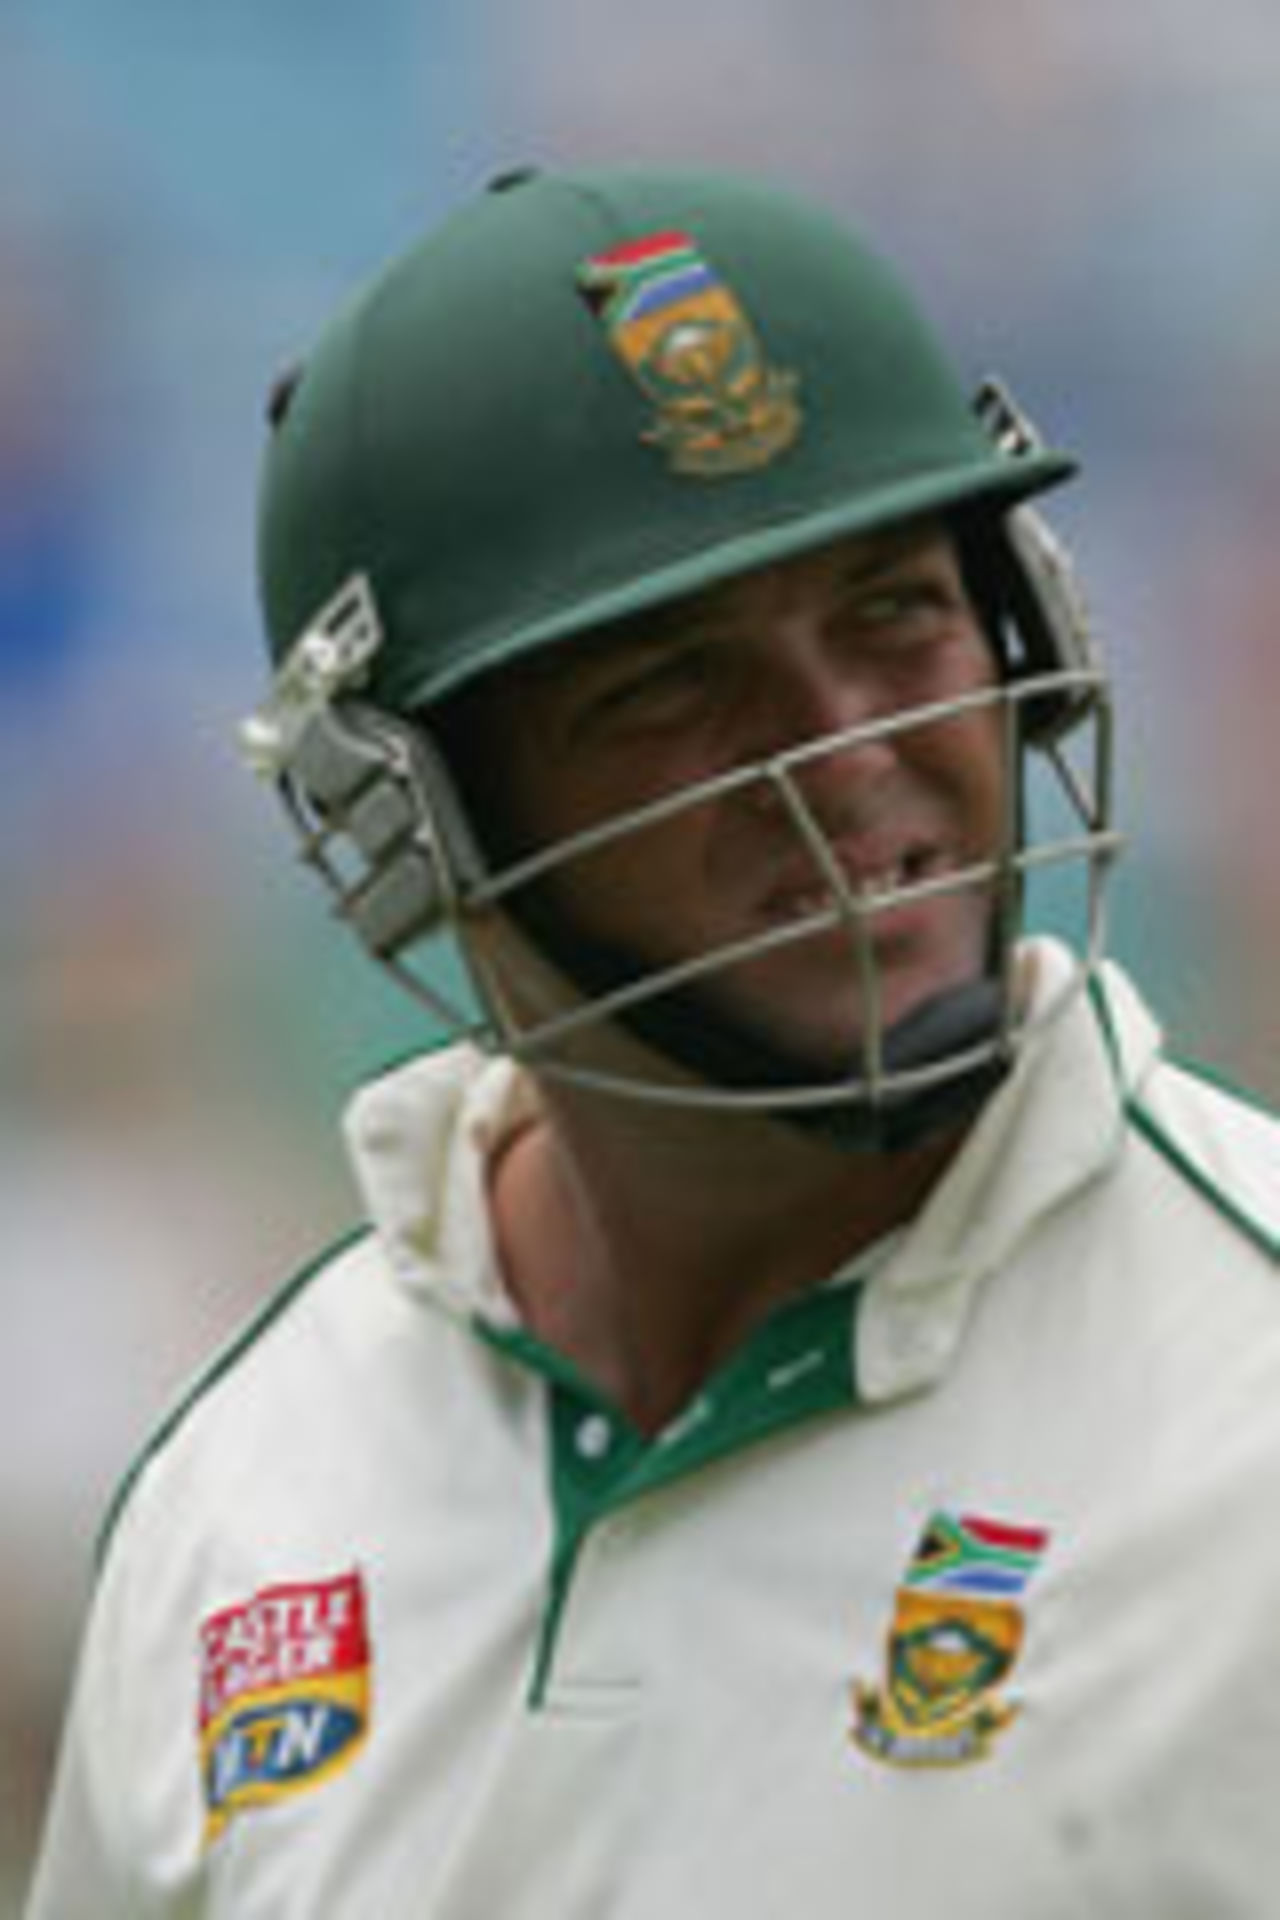 Jacques Kallis winces looking at the reply of his dismissal, South Africa v England, 2nd Test, Durban, 5th day, December 30 2004